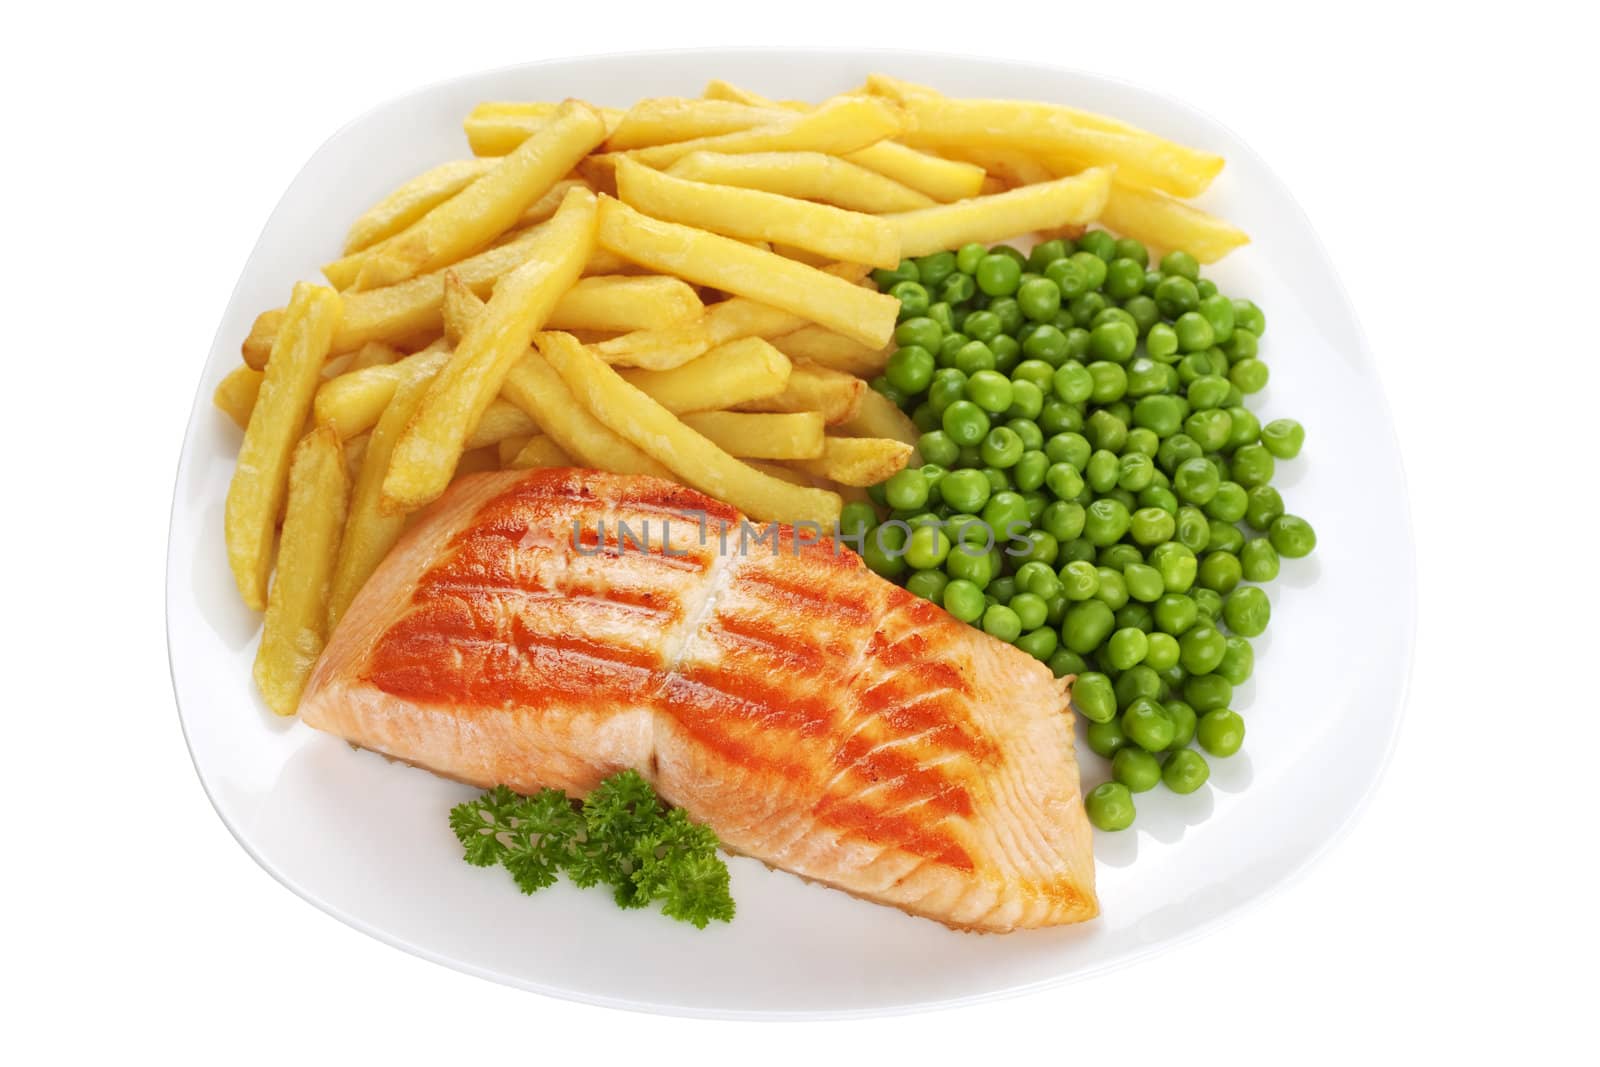 Plated Meal of Salmon Steak Chips and Peas by Travelling-light